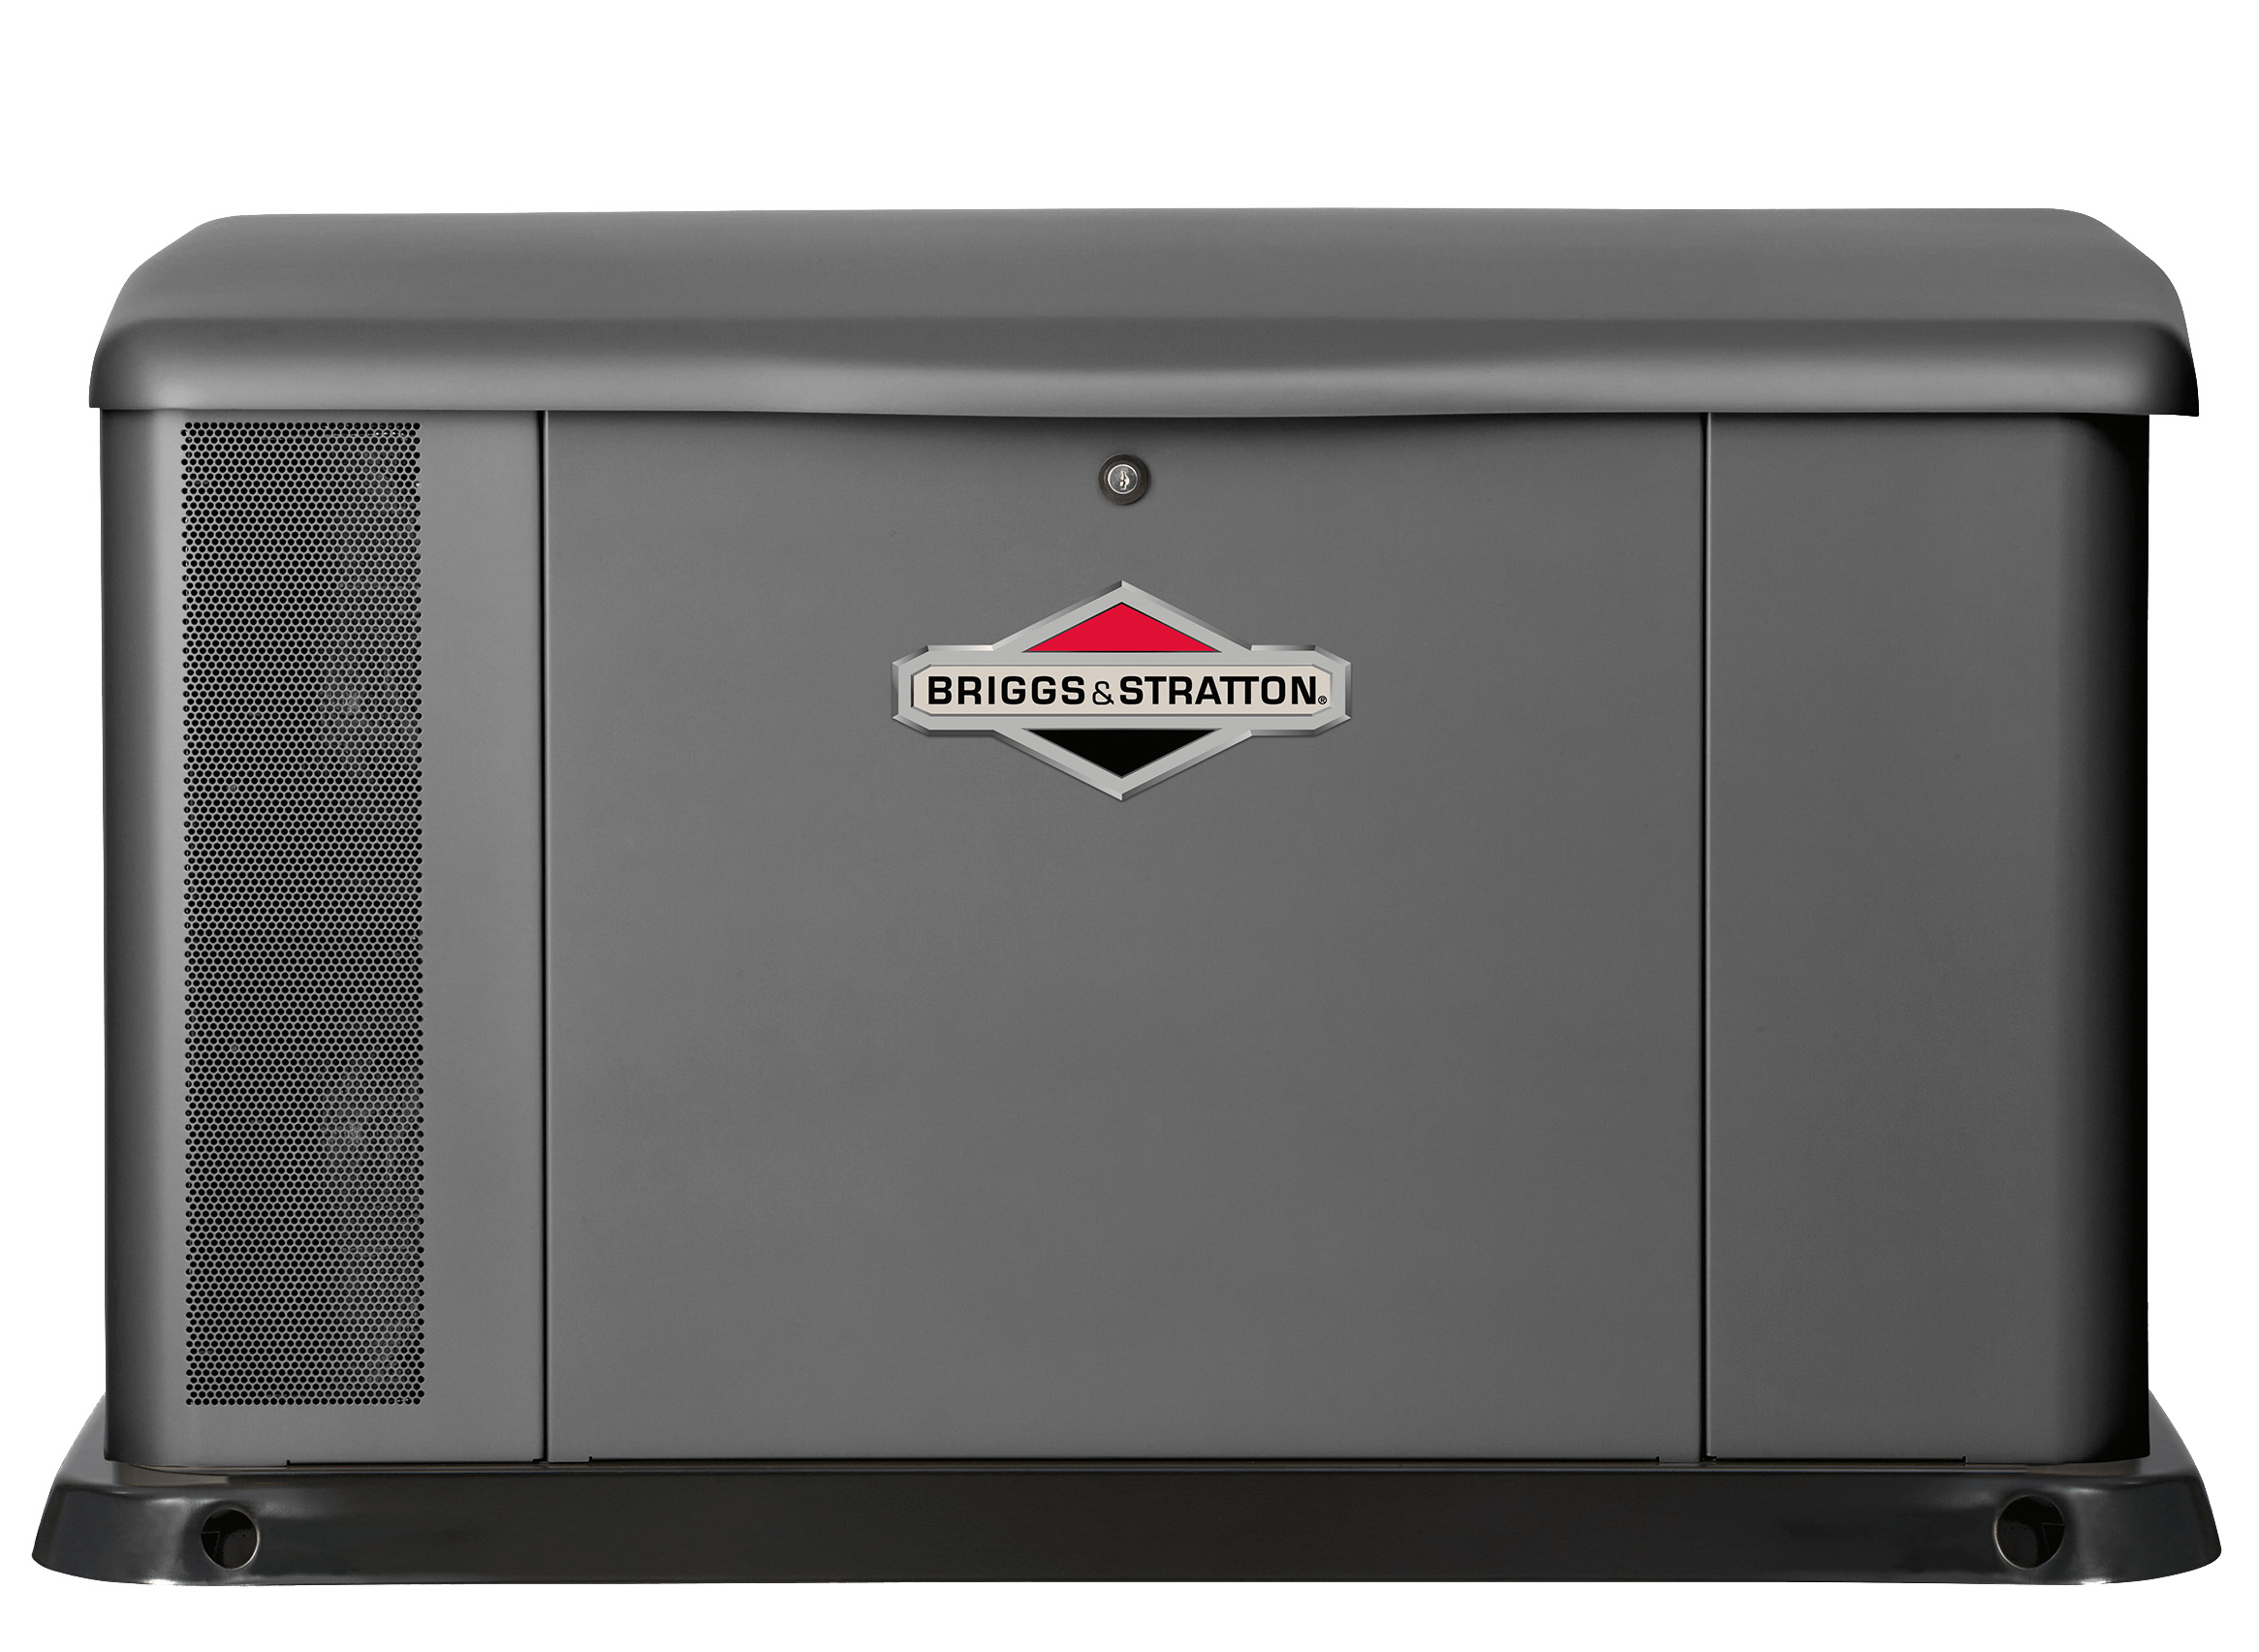 Briggs & Stratton automatic standby generators installed by RALCO 